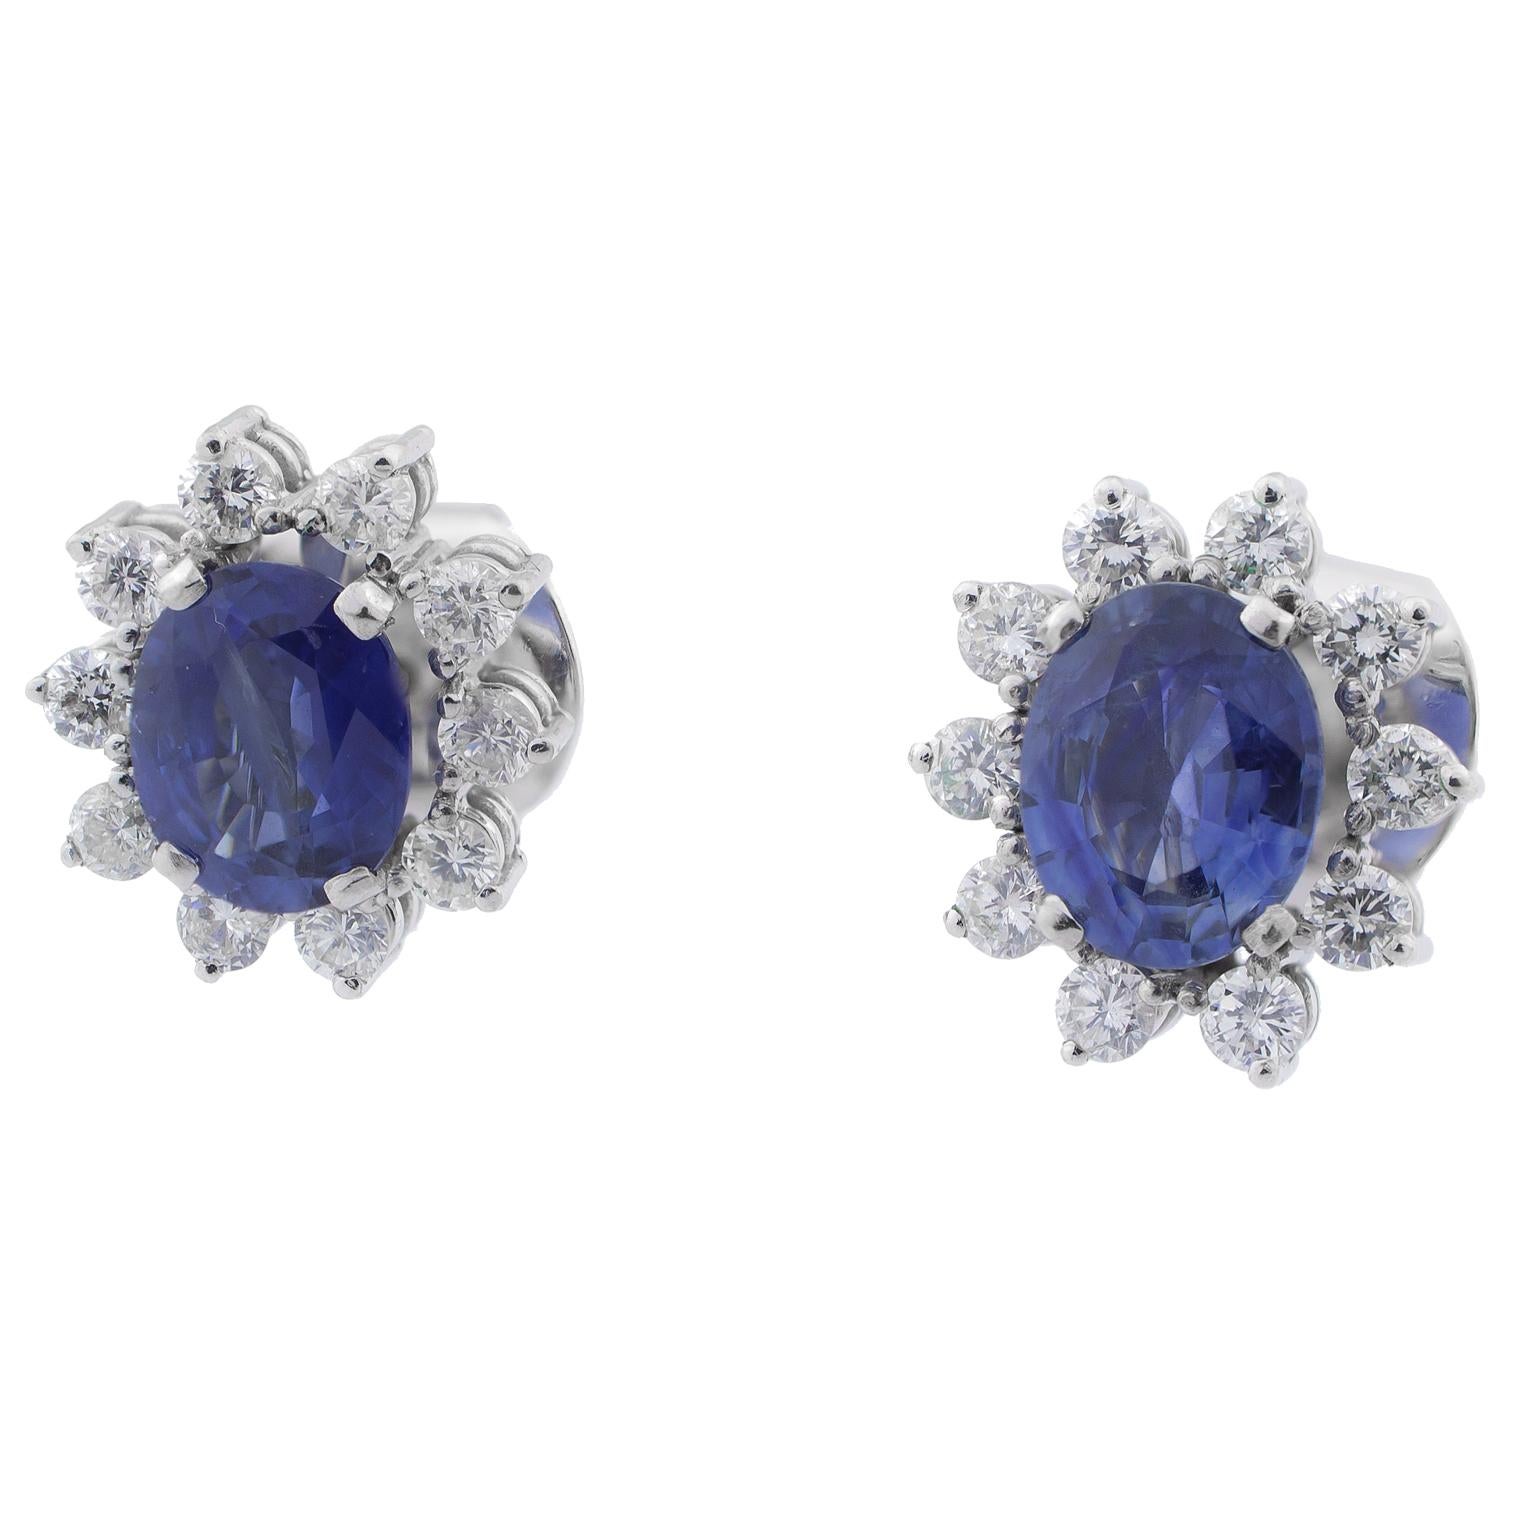 White gold earrings set with two oval cut blue sapphires with a total of 3.80 carats in weight, surrounded by 20 round brilliant cut diamonds totalling 1.00 carats.